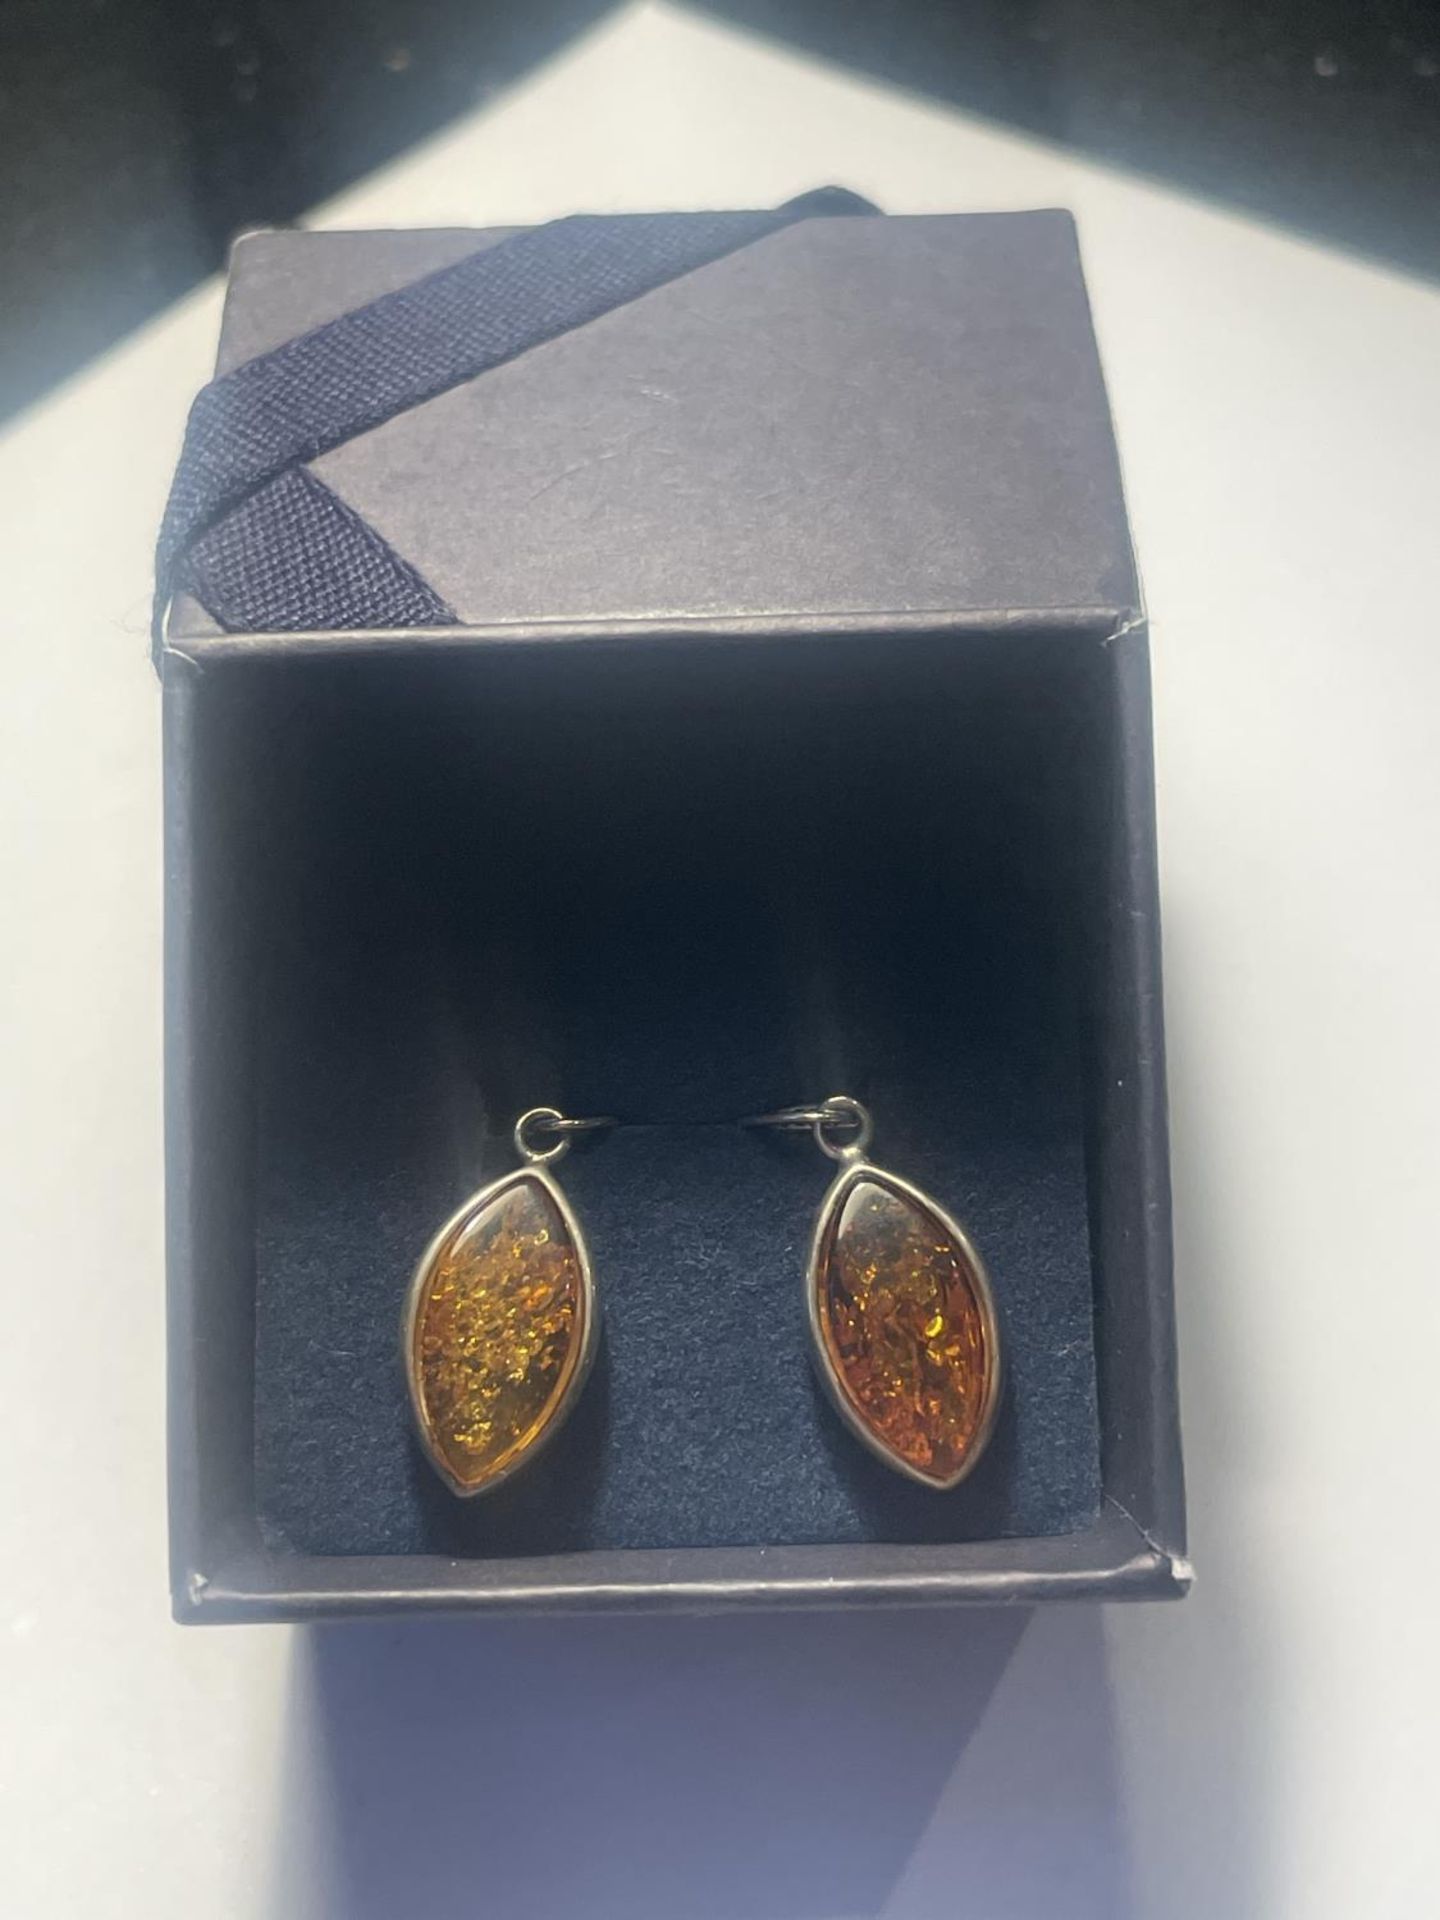 A PAIR OF SILVER AND AMBER DROP EARRINGS IN A PRESENTATION BOX